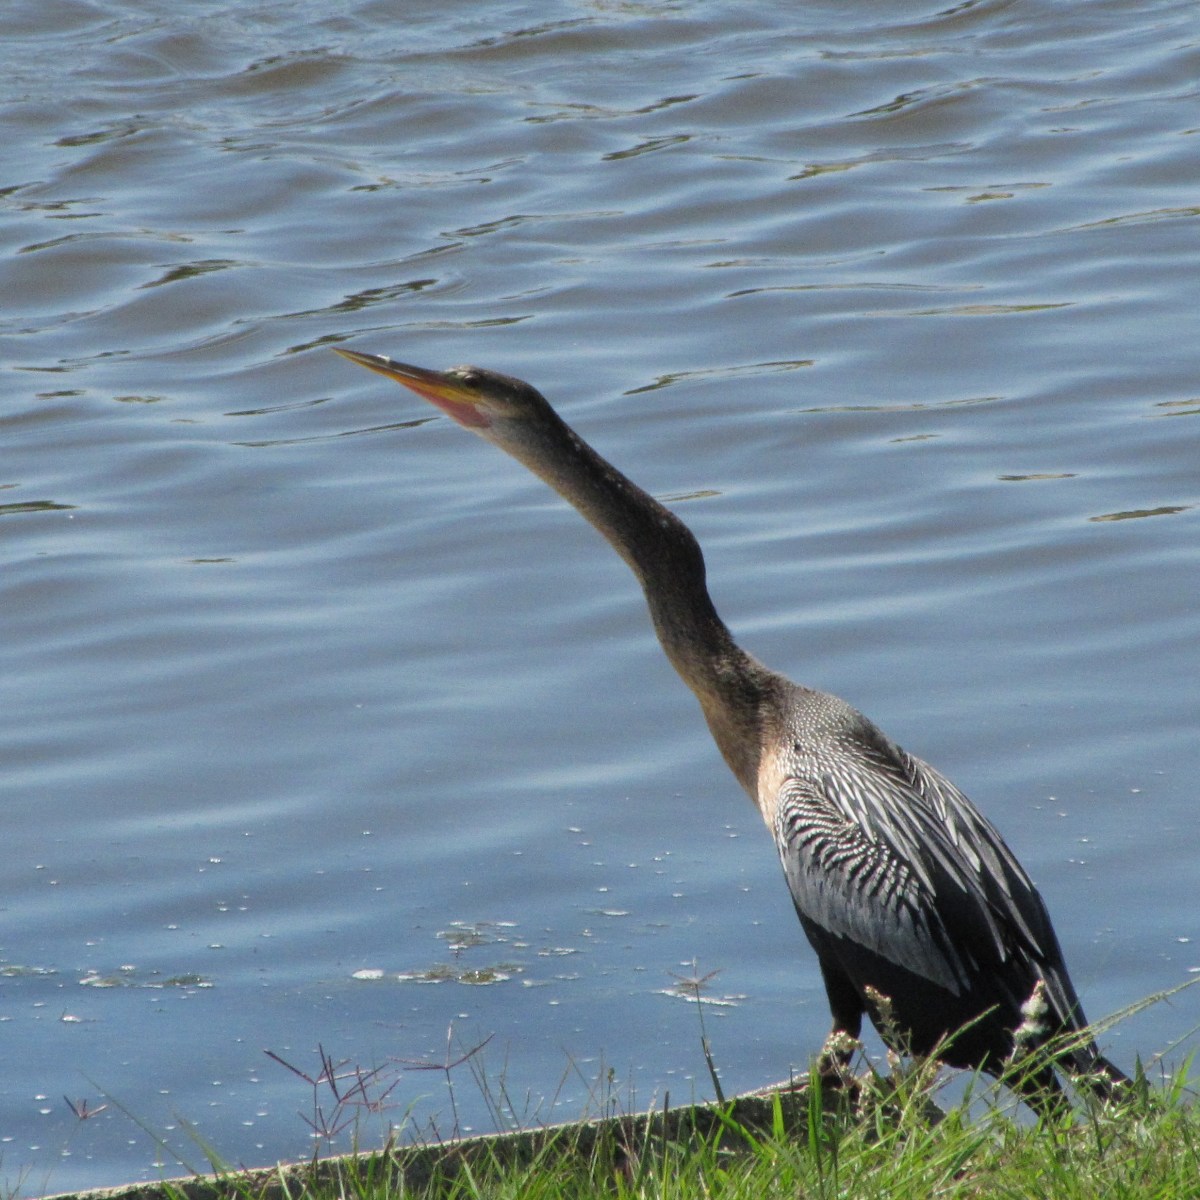 The neck is snake-like. The beak is pointed for spearing fish. 